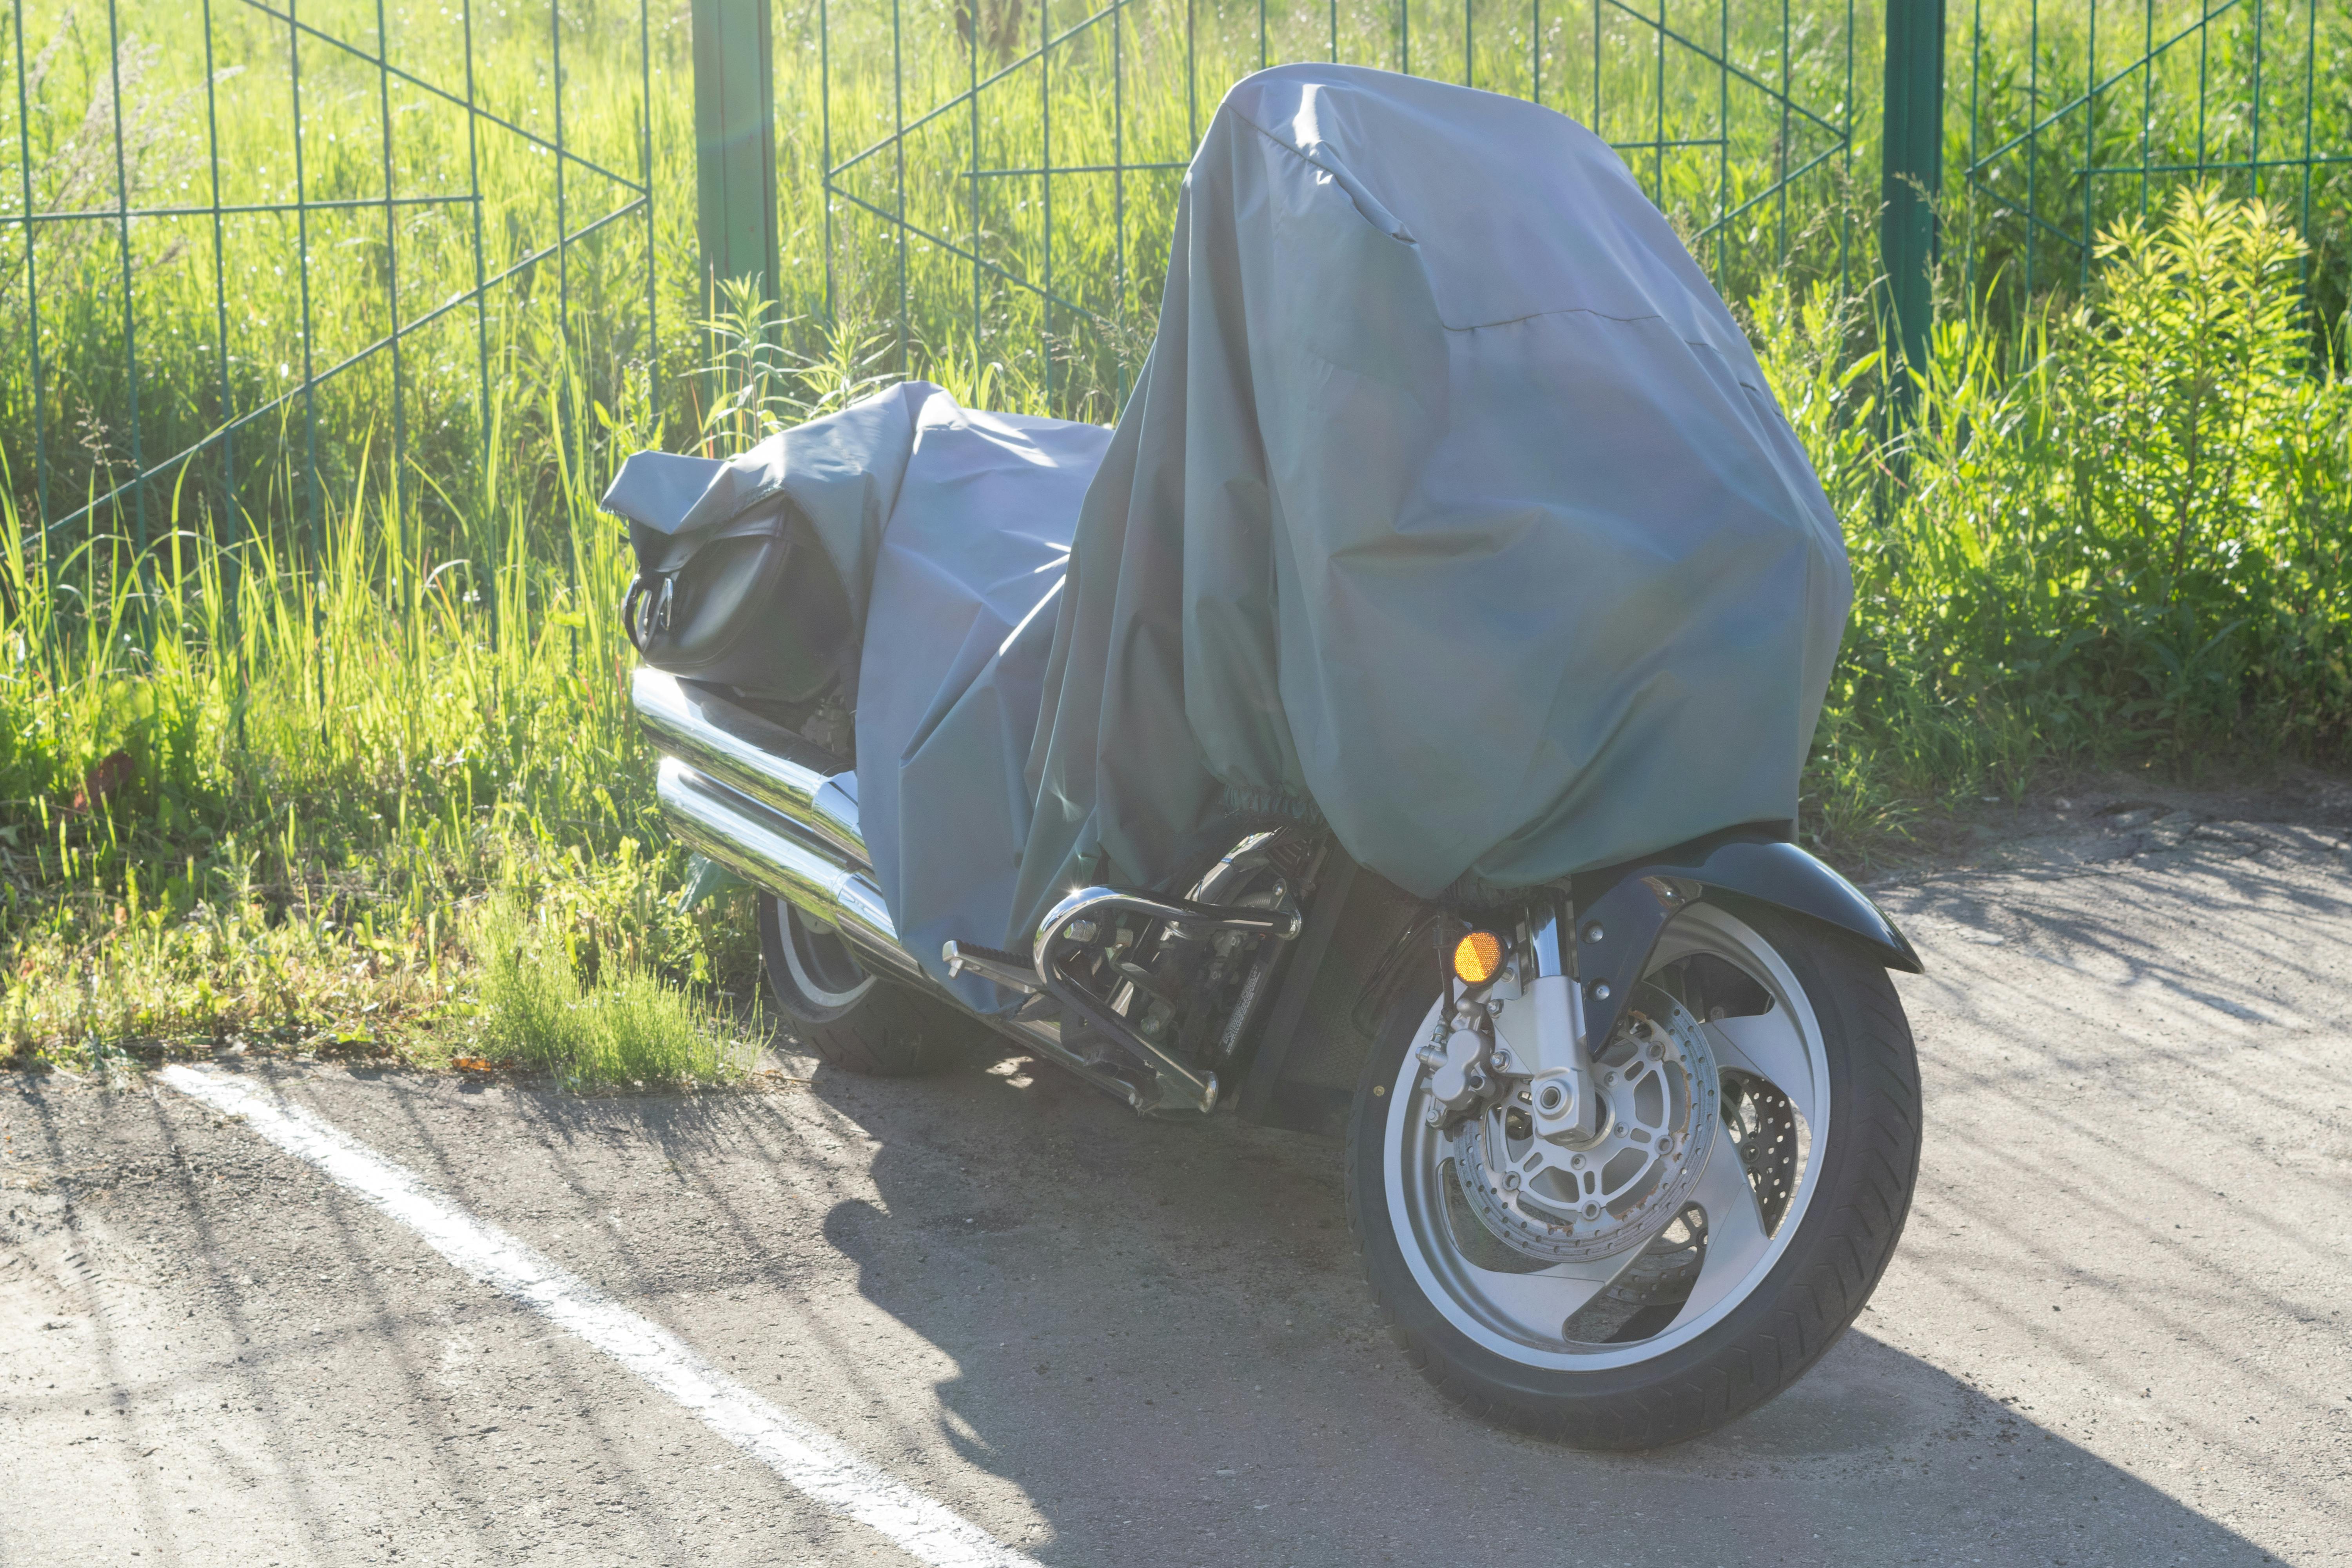 covered motorcycle collecting dust - should I sell my motorcycle?